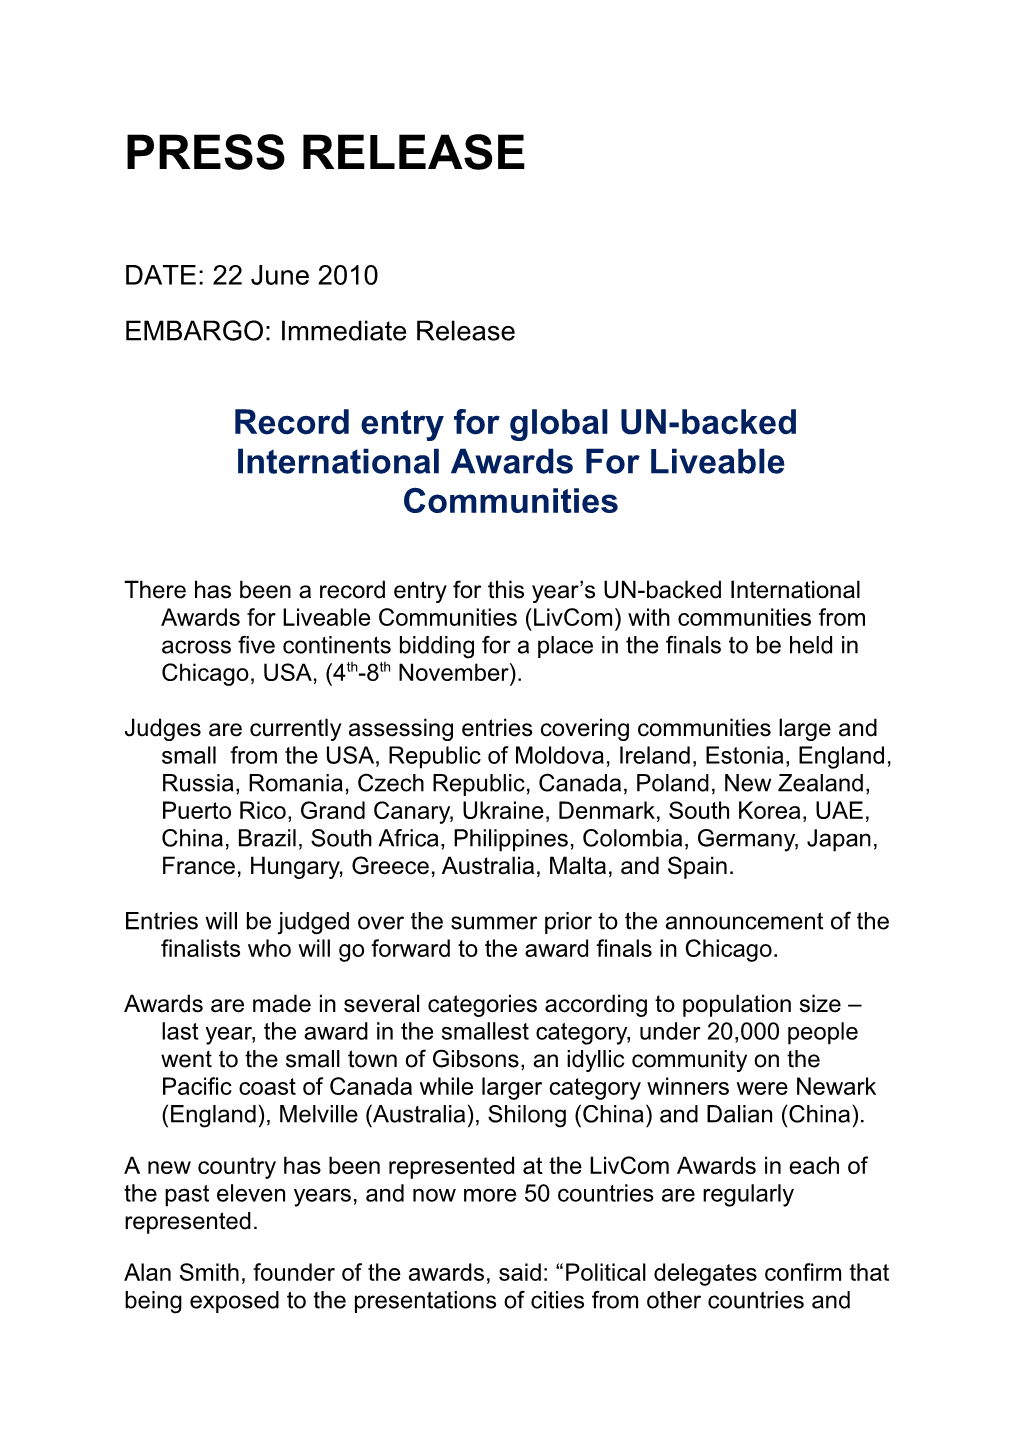 Record Entry for Global UN-Backed International Awardsfor Liveable Communities